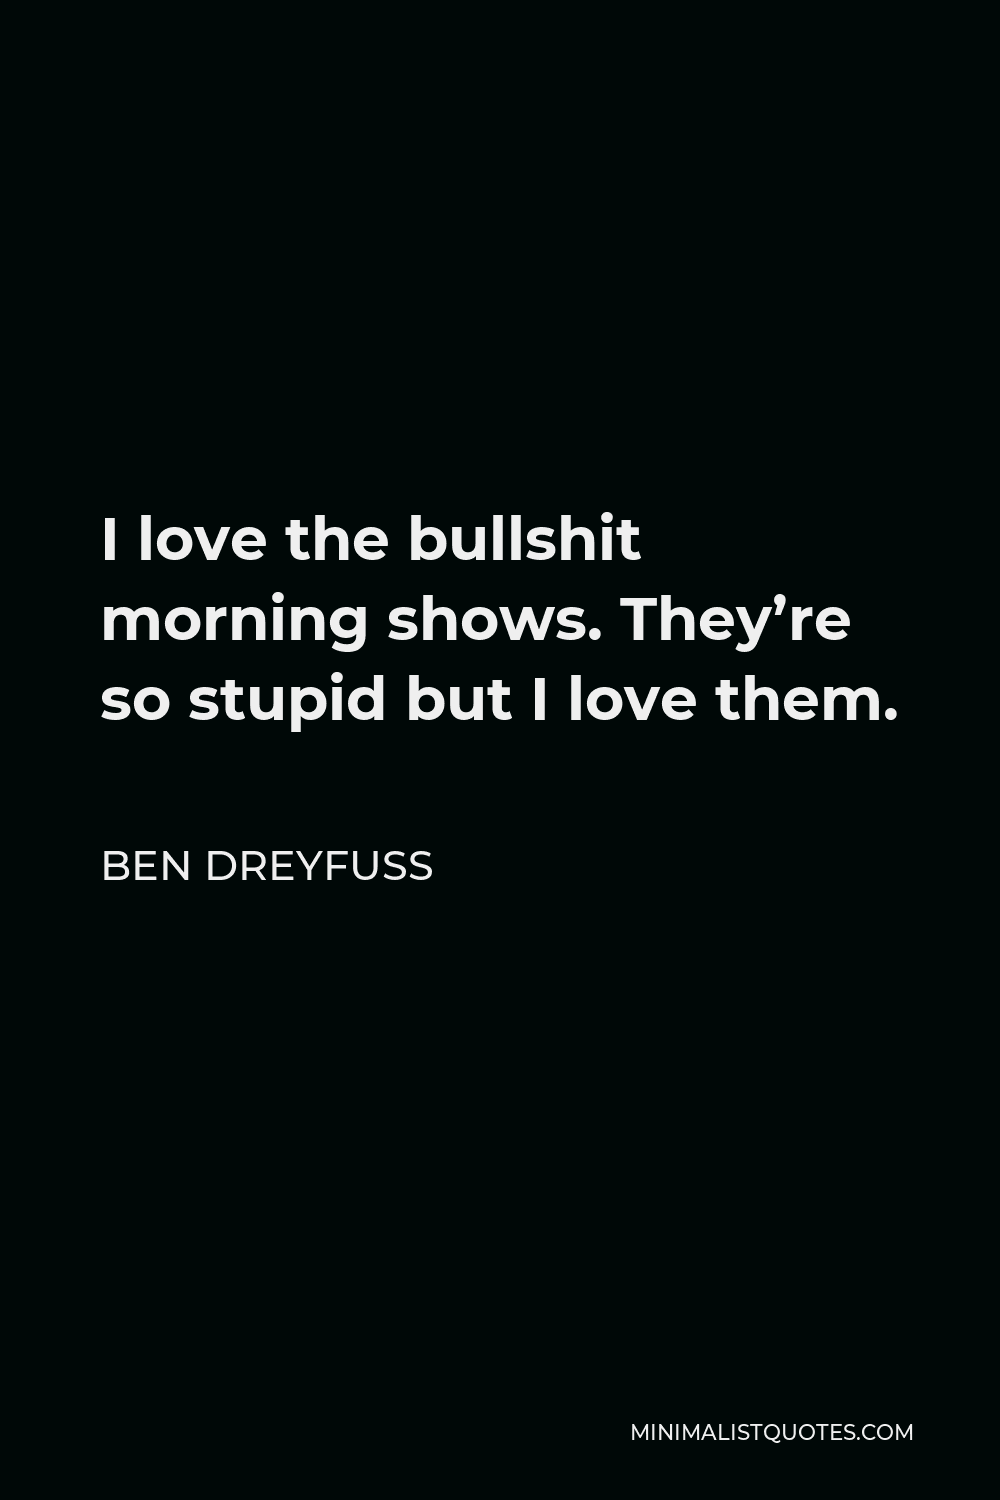 Ben Dreyfuss Quote - I love the bullshit morning shows. They’re so stupid but I love them.